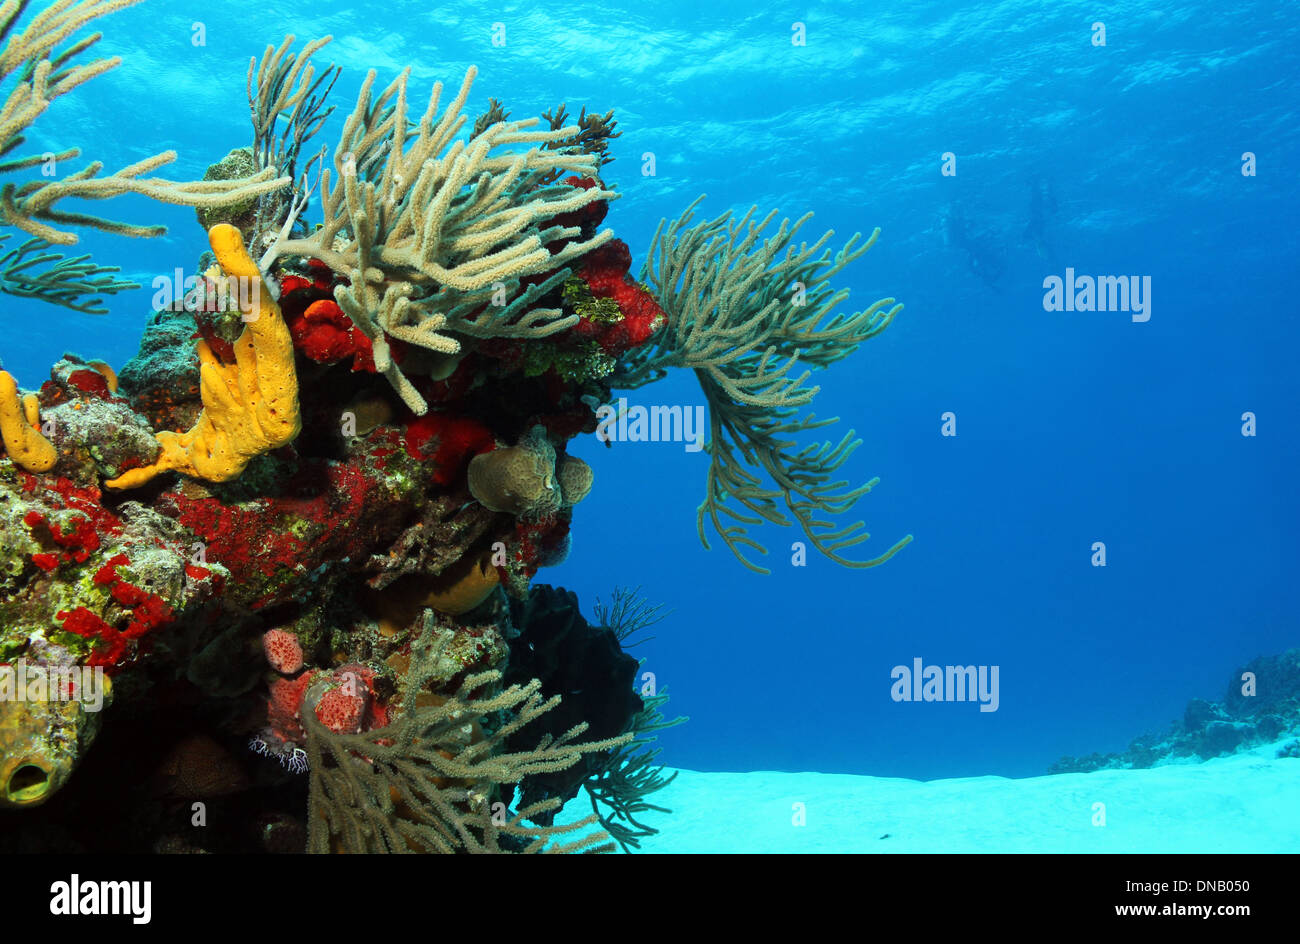 Corals on White Sand with Surfacing Divers in the Background, Cozumel, Mexico Stock Photo